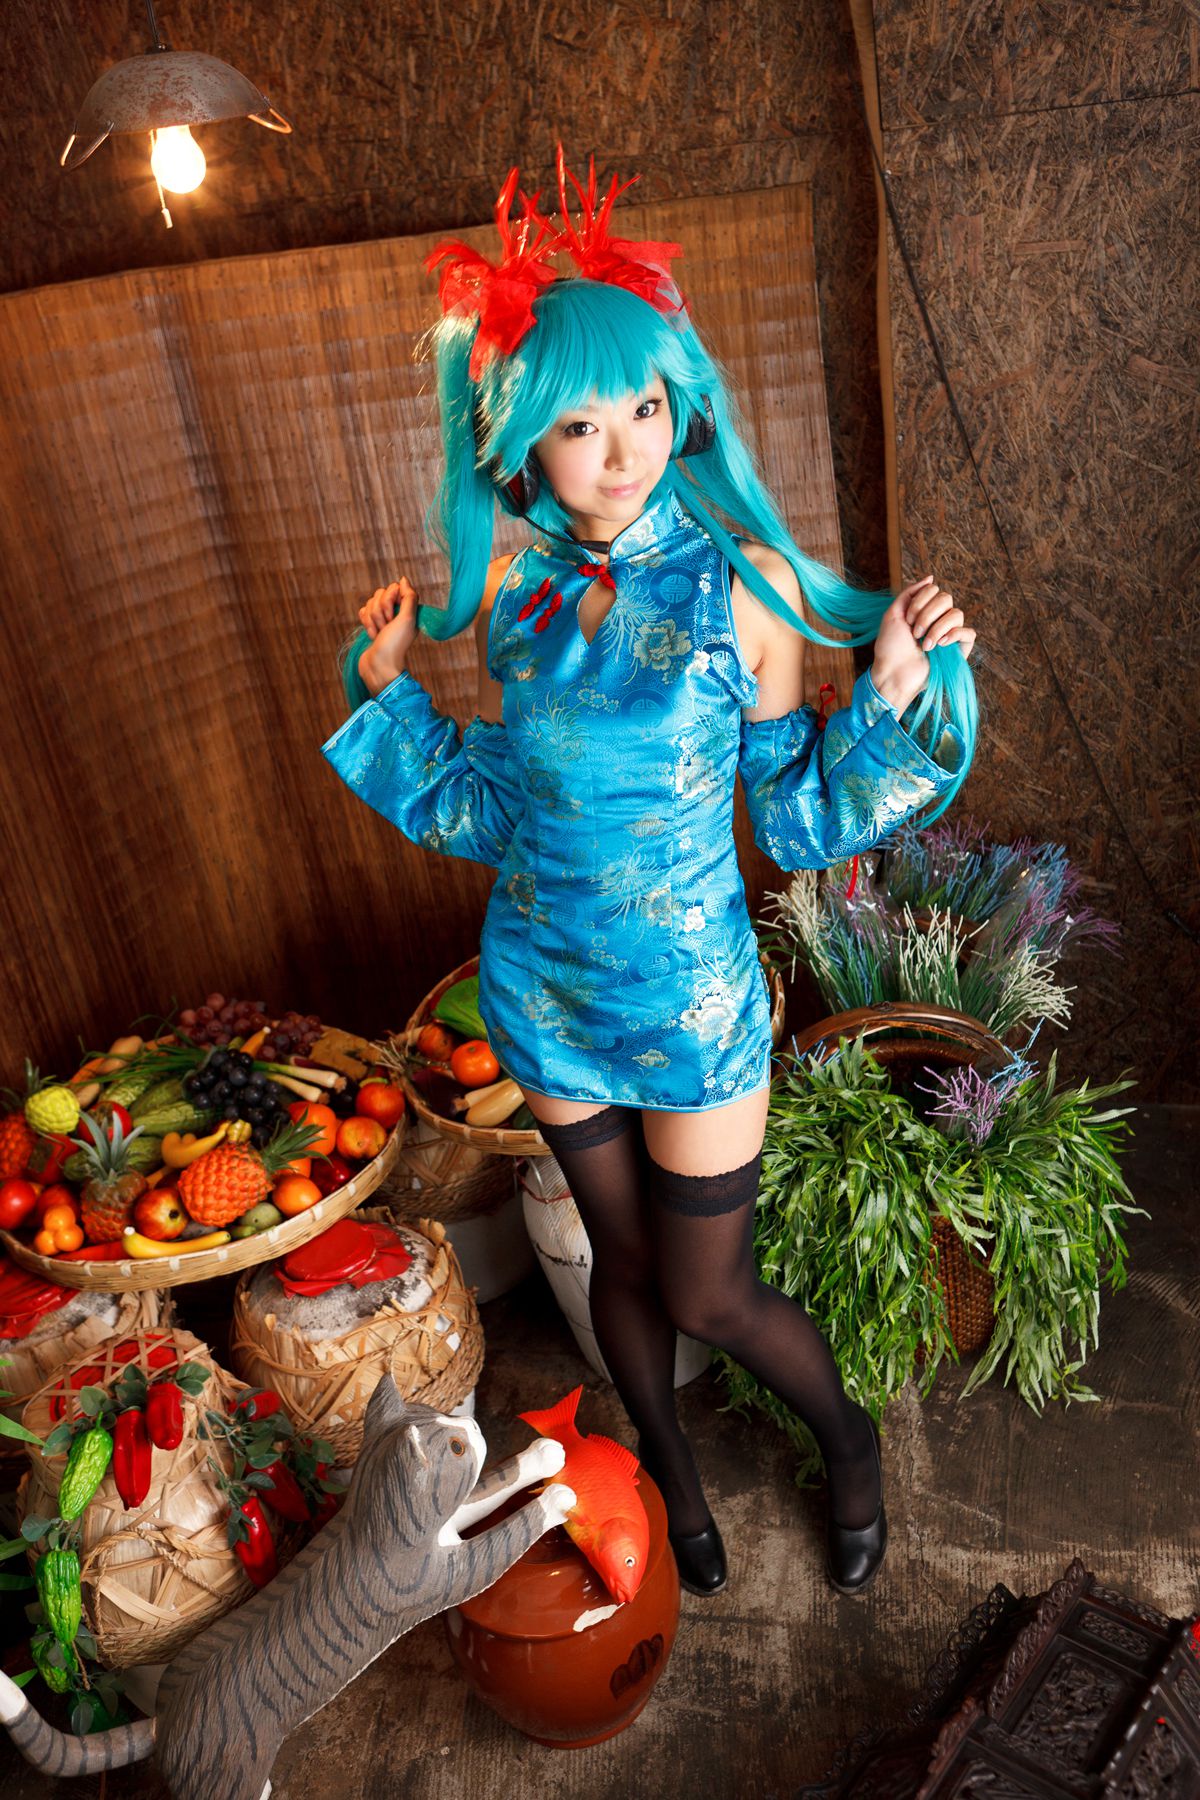 taotuhome[Cosplay] Necoco as Hatsune Miku from Vocaloid 套图第42张